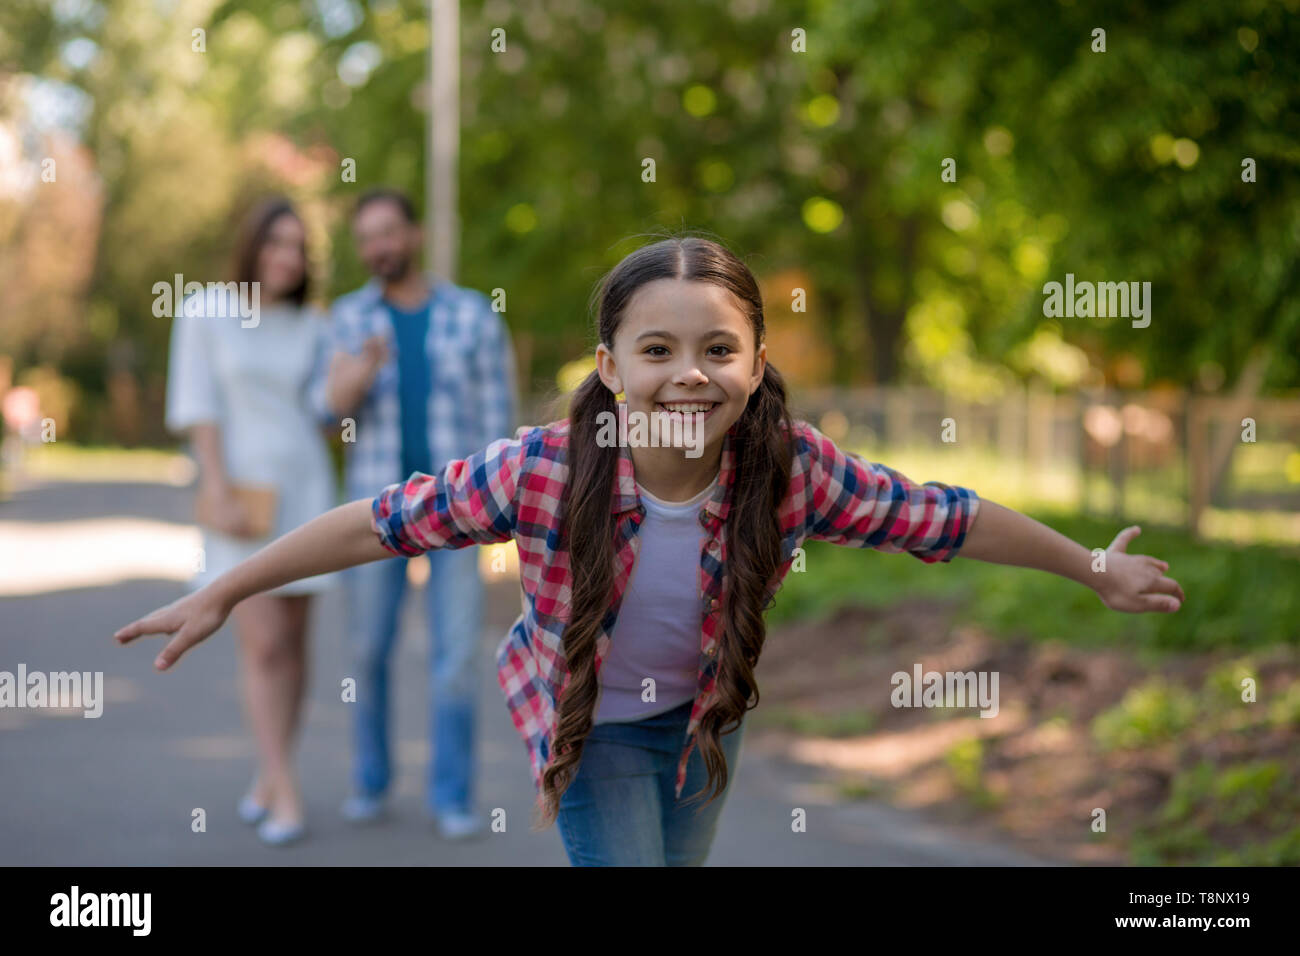 Smiling Little Girl In The Park With Her Arms Open. Parents Are Background. Stock Photo